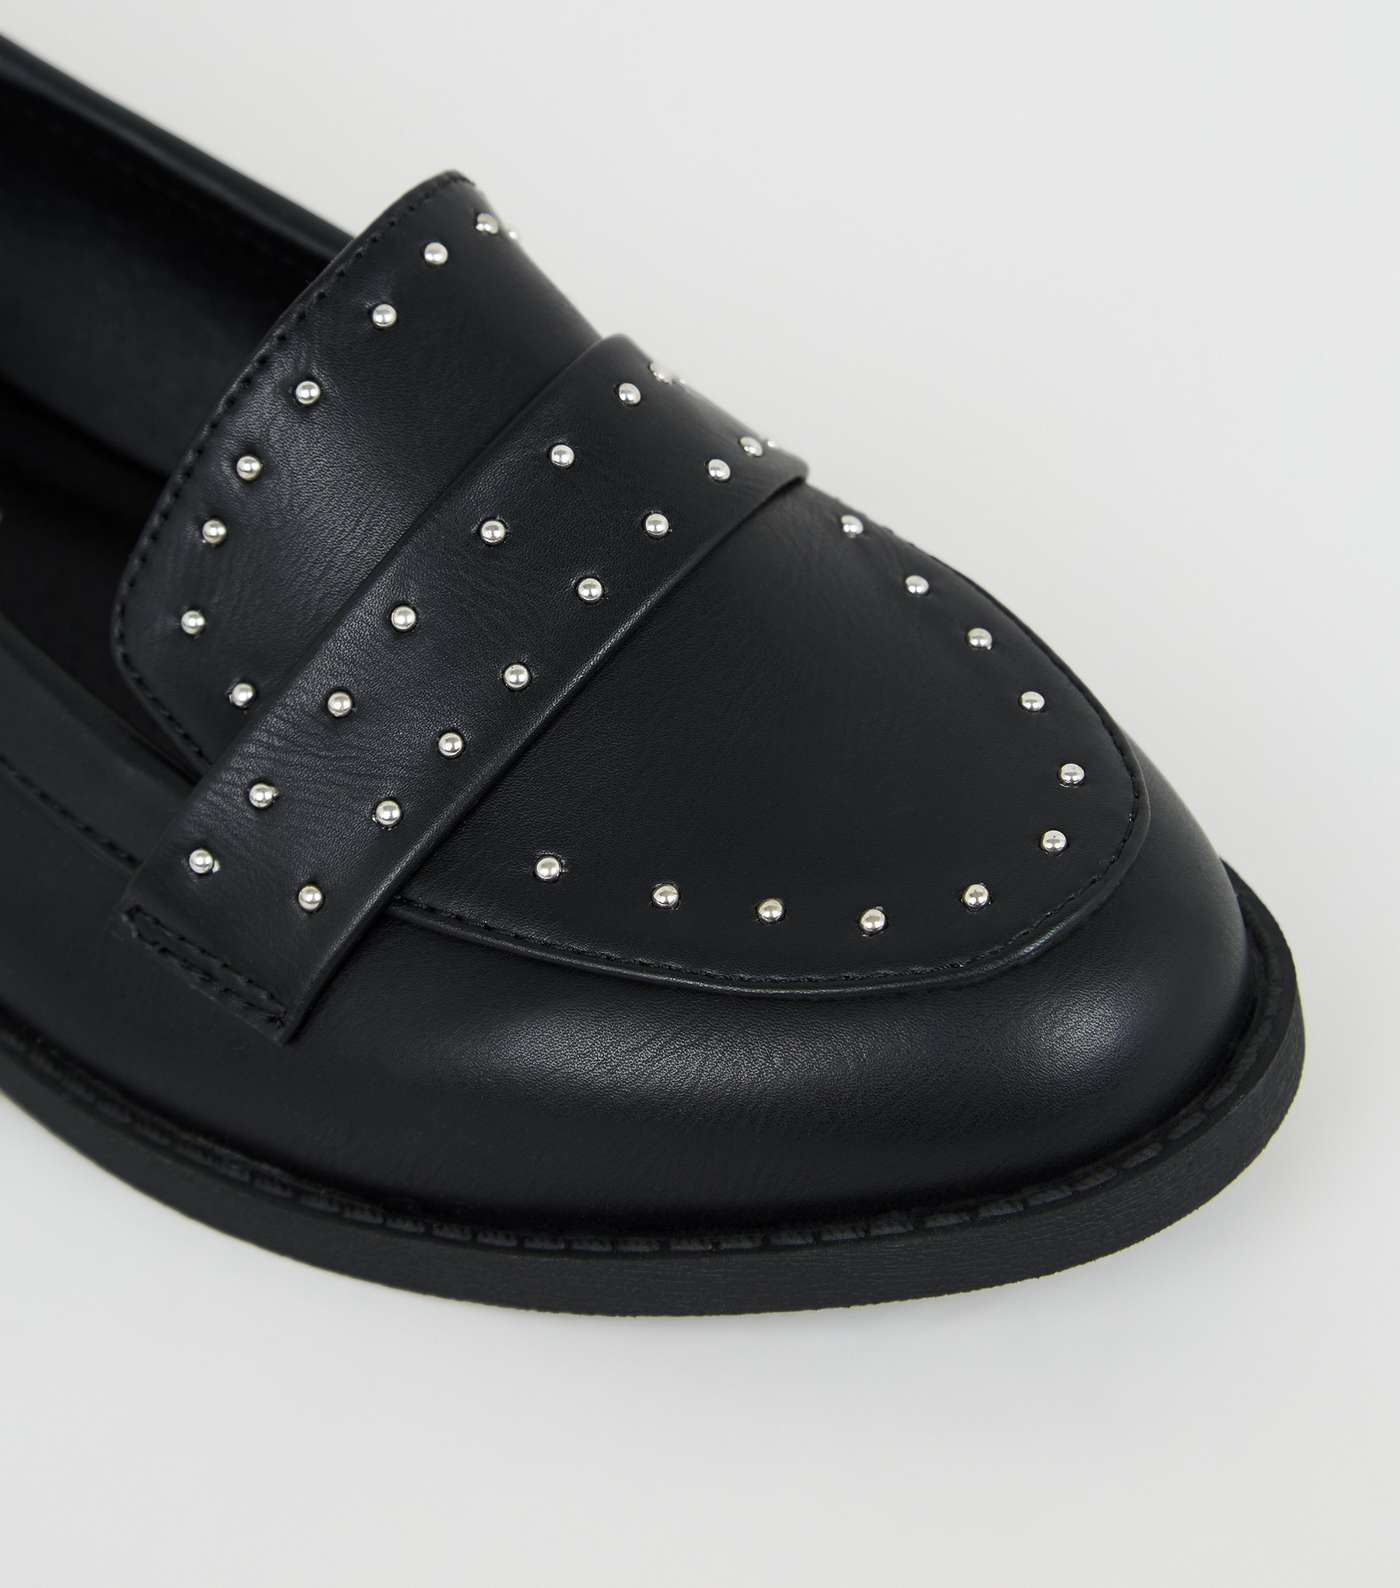 Wide Fit Black Leather-Look Studded Loafers Image 4